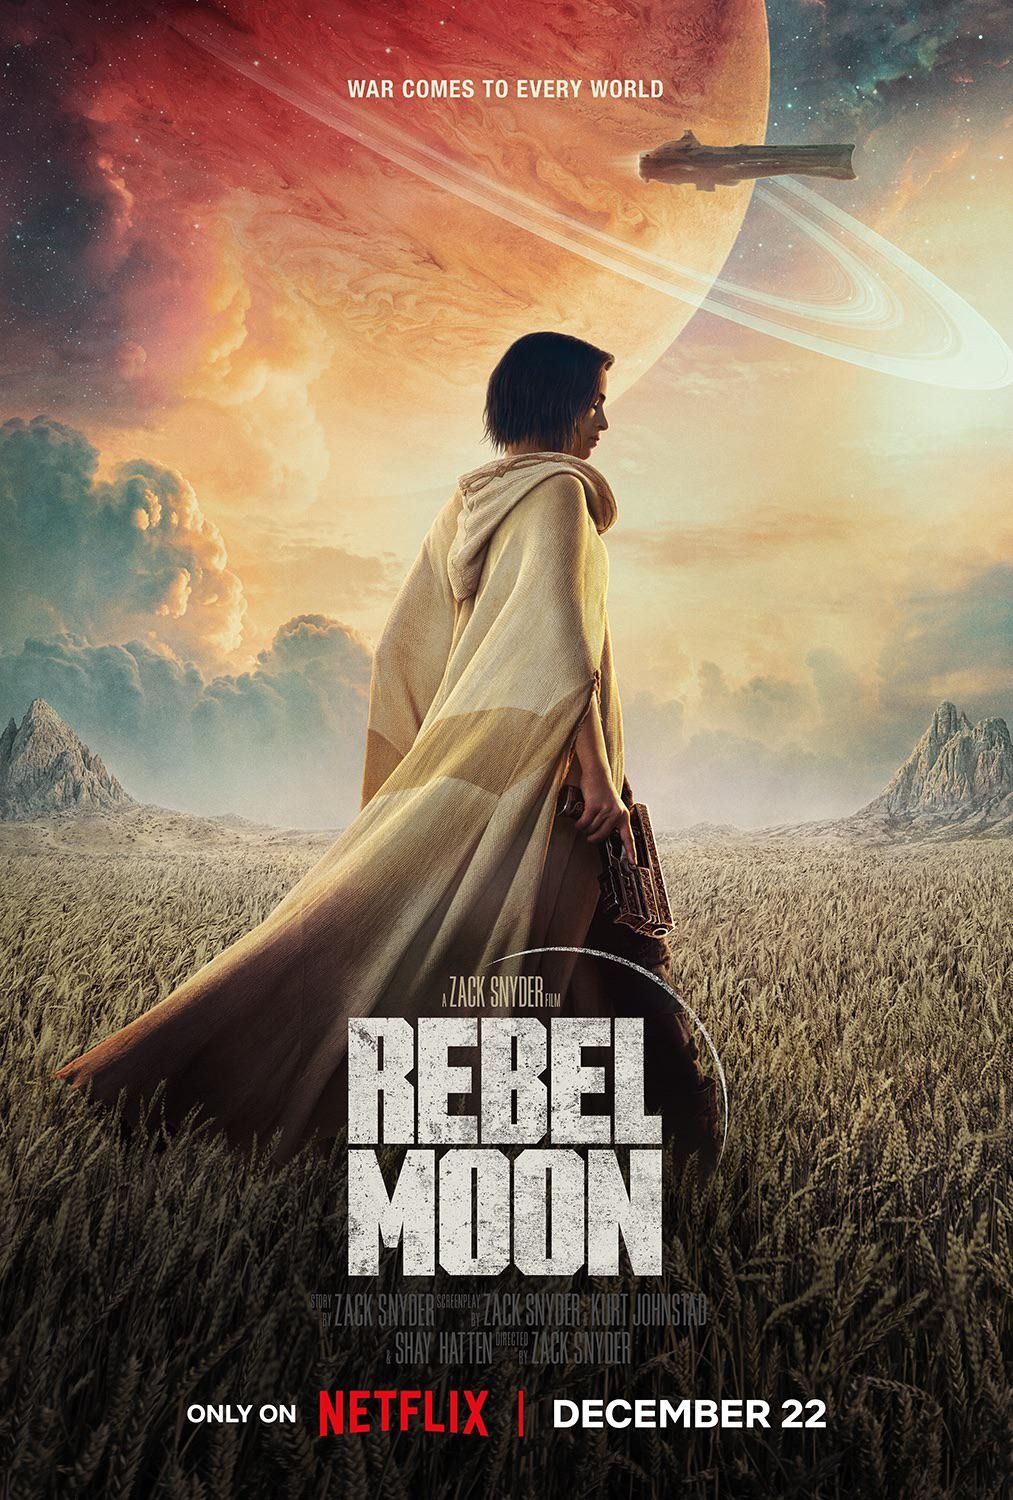 Rebel Moon' Review: Knocks Off 'Star Wars' and a Dozen Other Sources